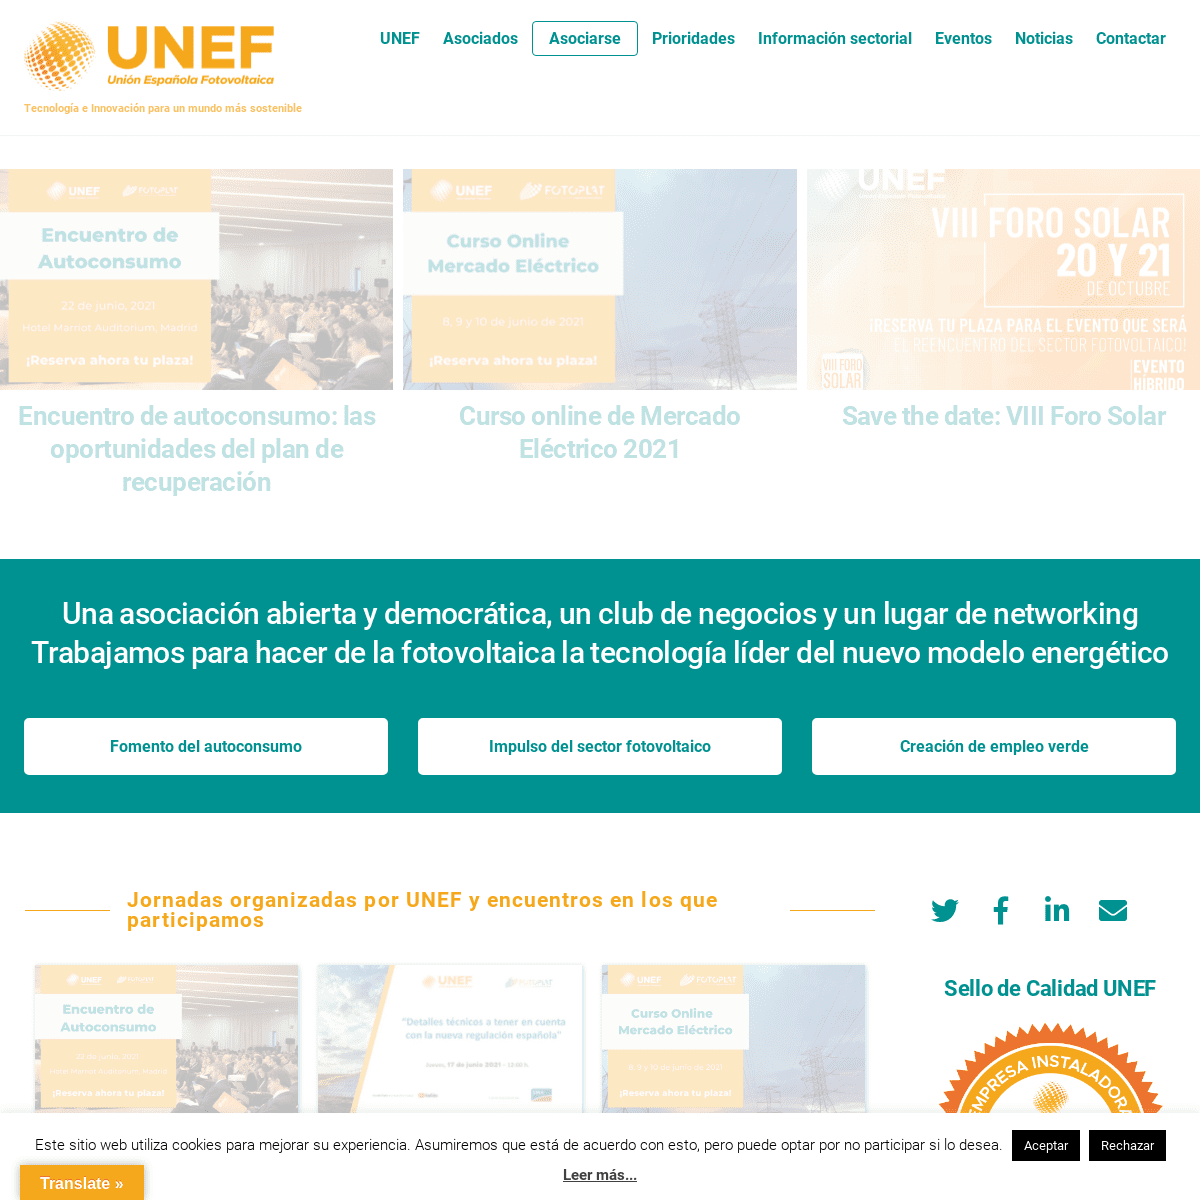 A complete backup of https://unef.es